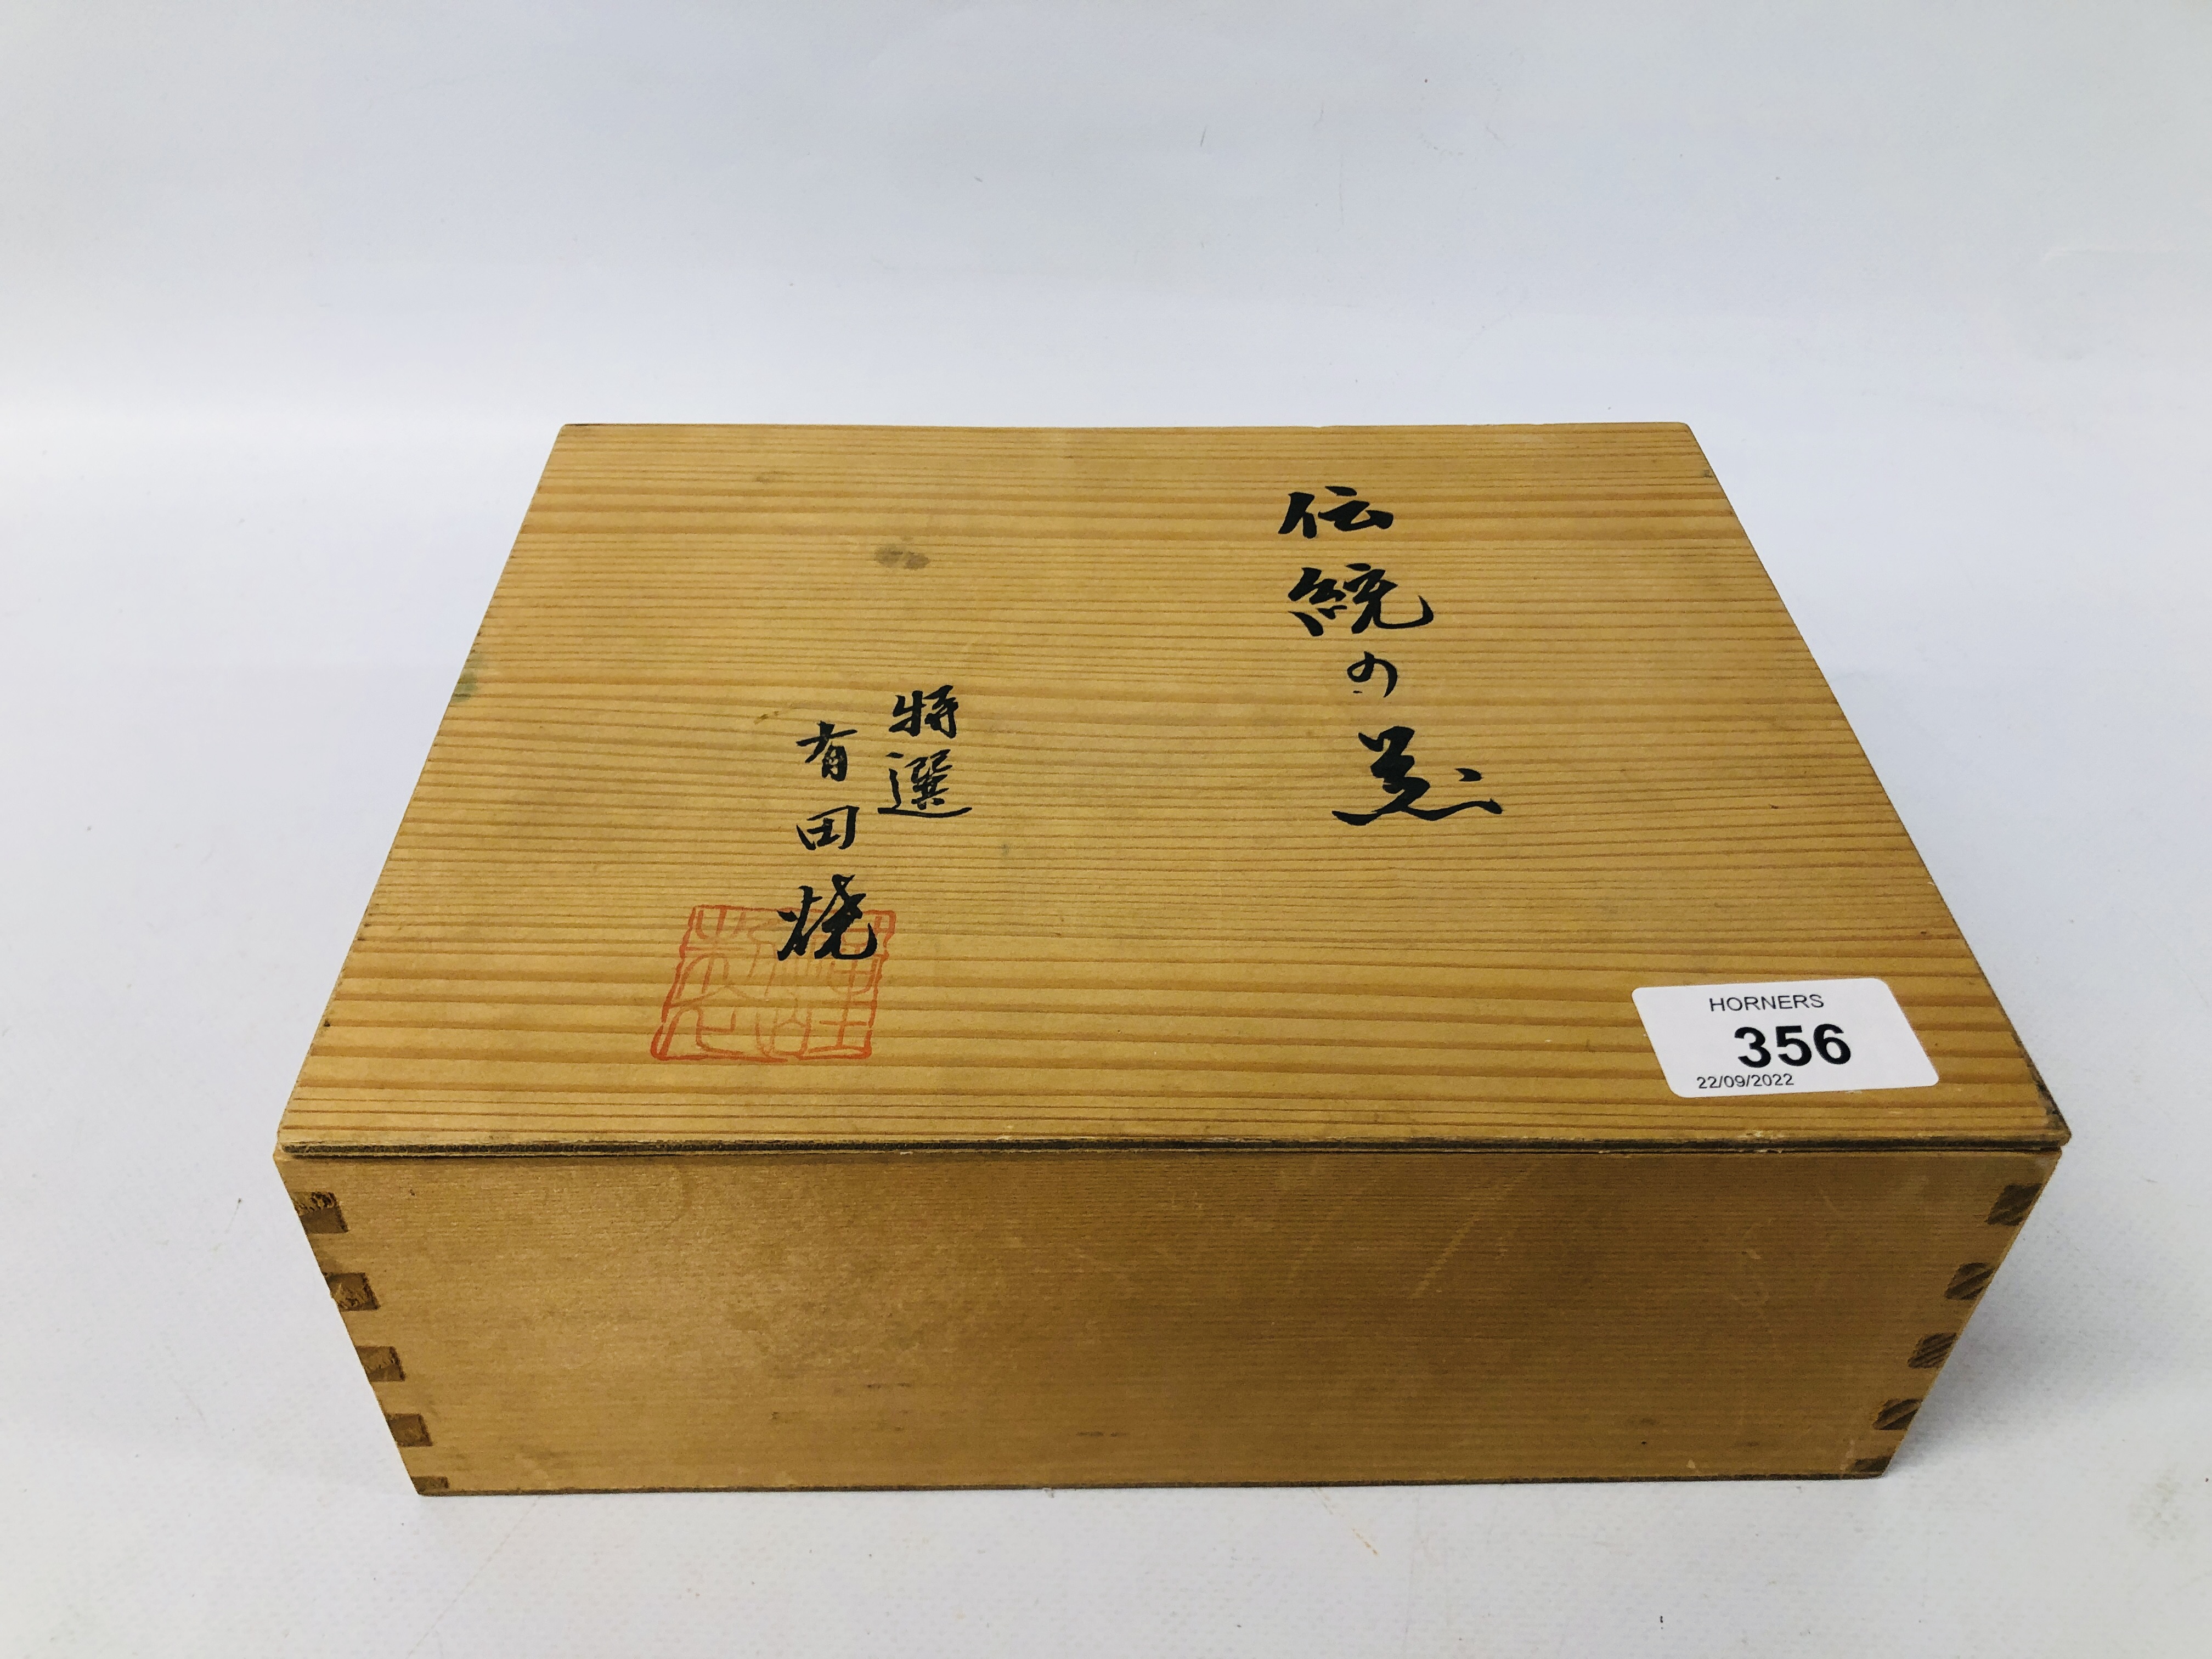 FINE 20TH CENTURY JAPANESE KAKIEMON SAKE SET COMPRISING TWO FLASKS AND FIVE CUPS IN ORIGINAL BOX. - Image 6 of 6